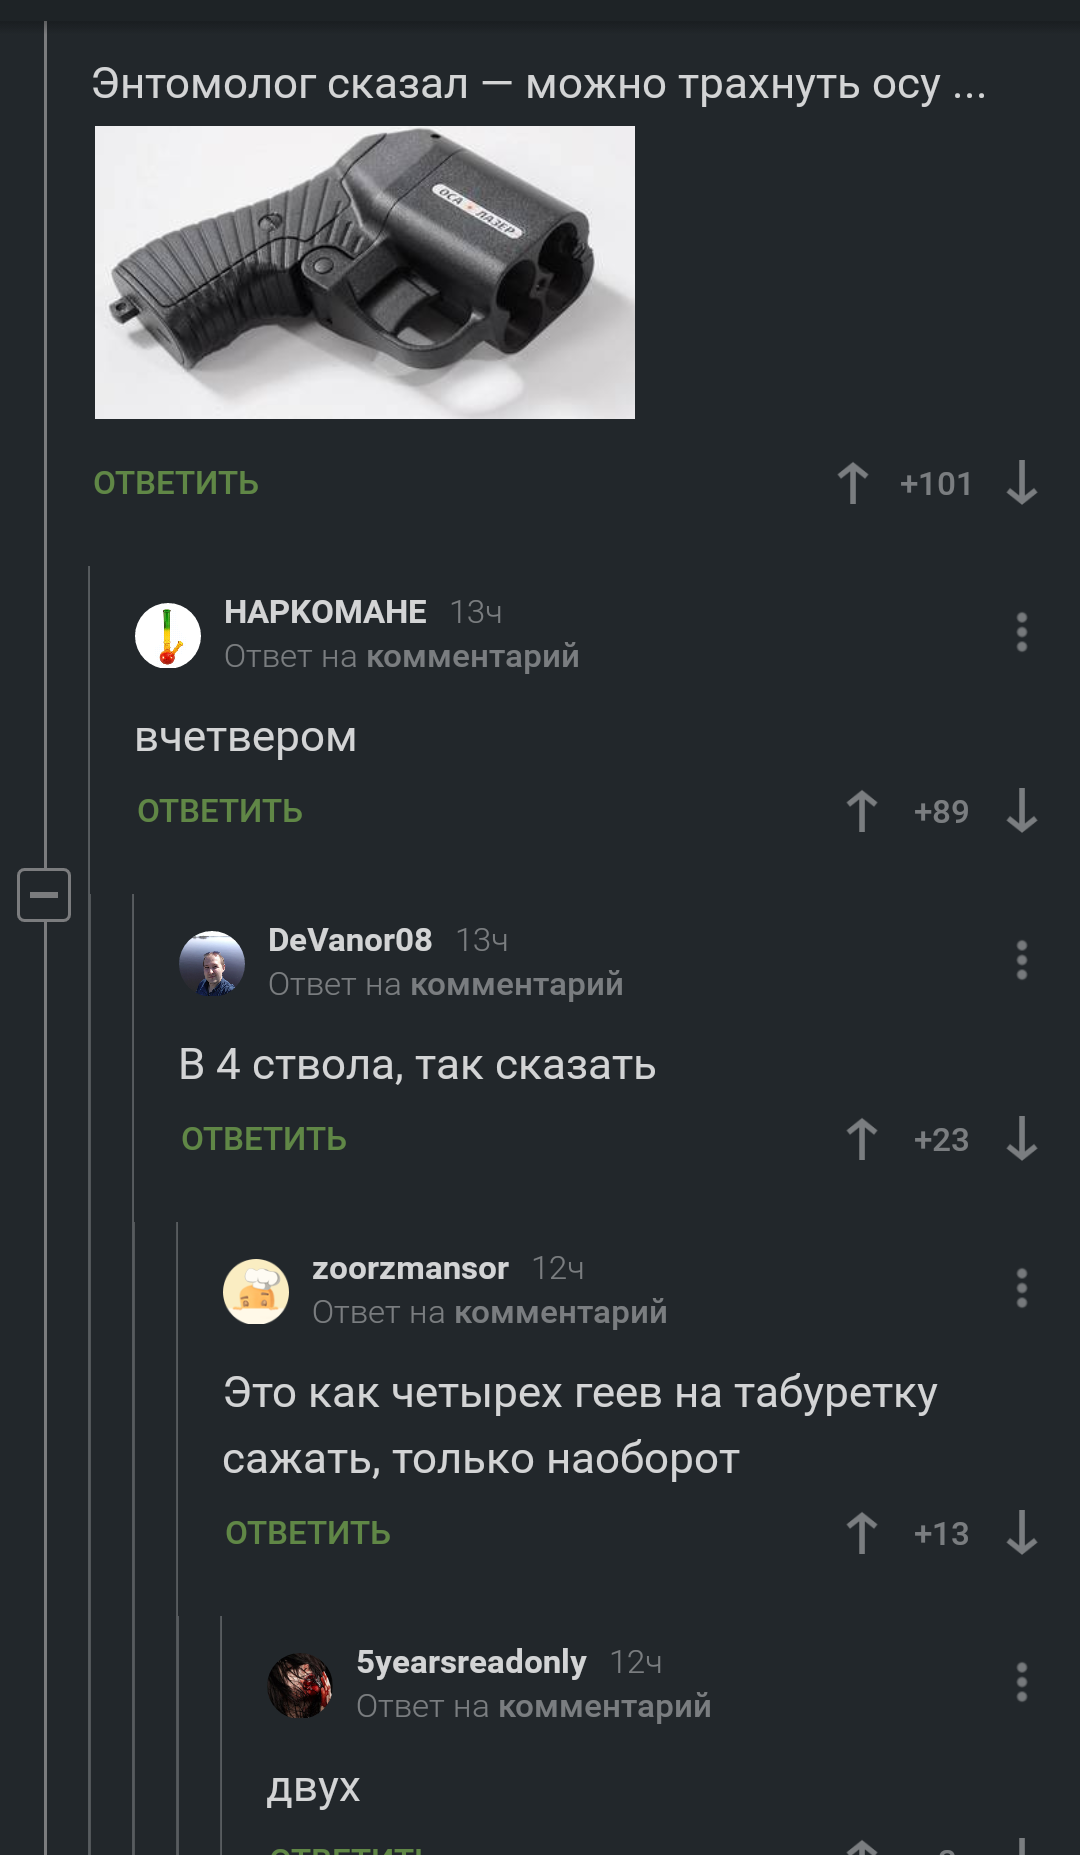 Comments for the post - Comments on Peekaboo, Humor, Russia, Wasp